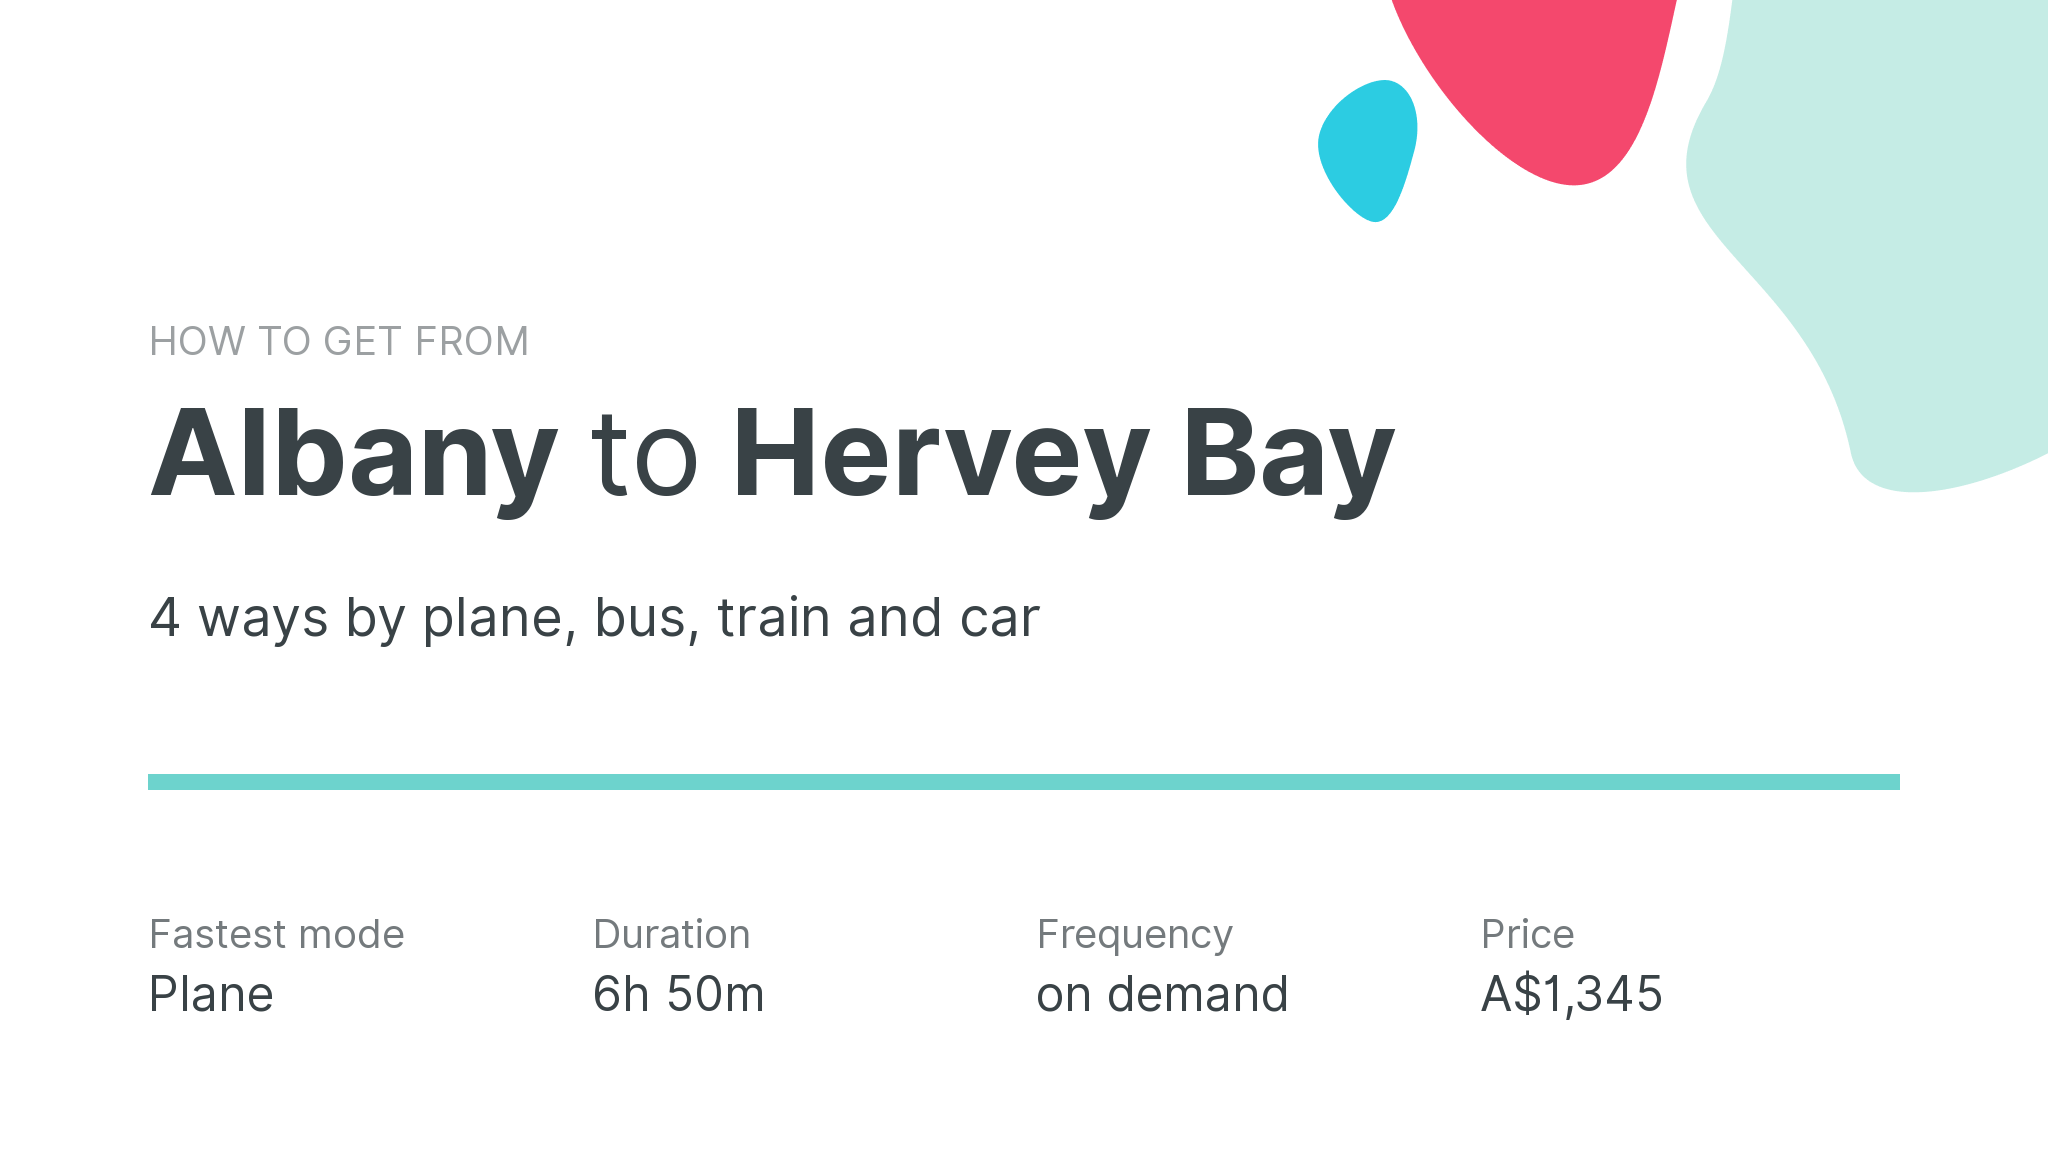 How do I get from Albany to Hervey Bay